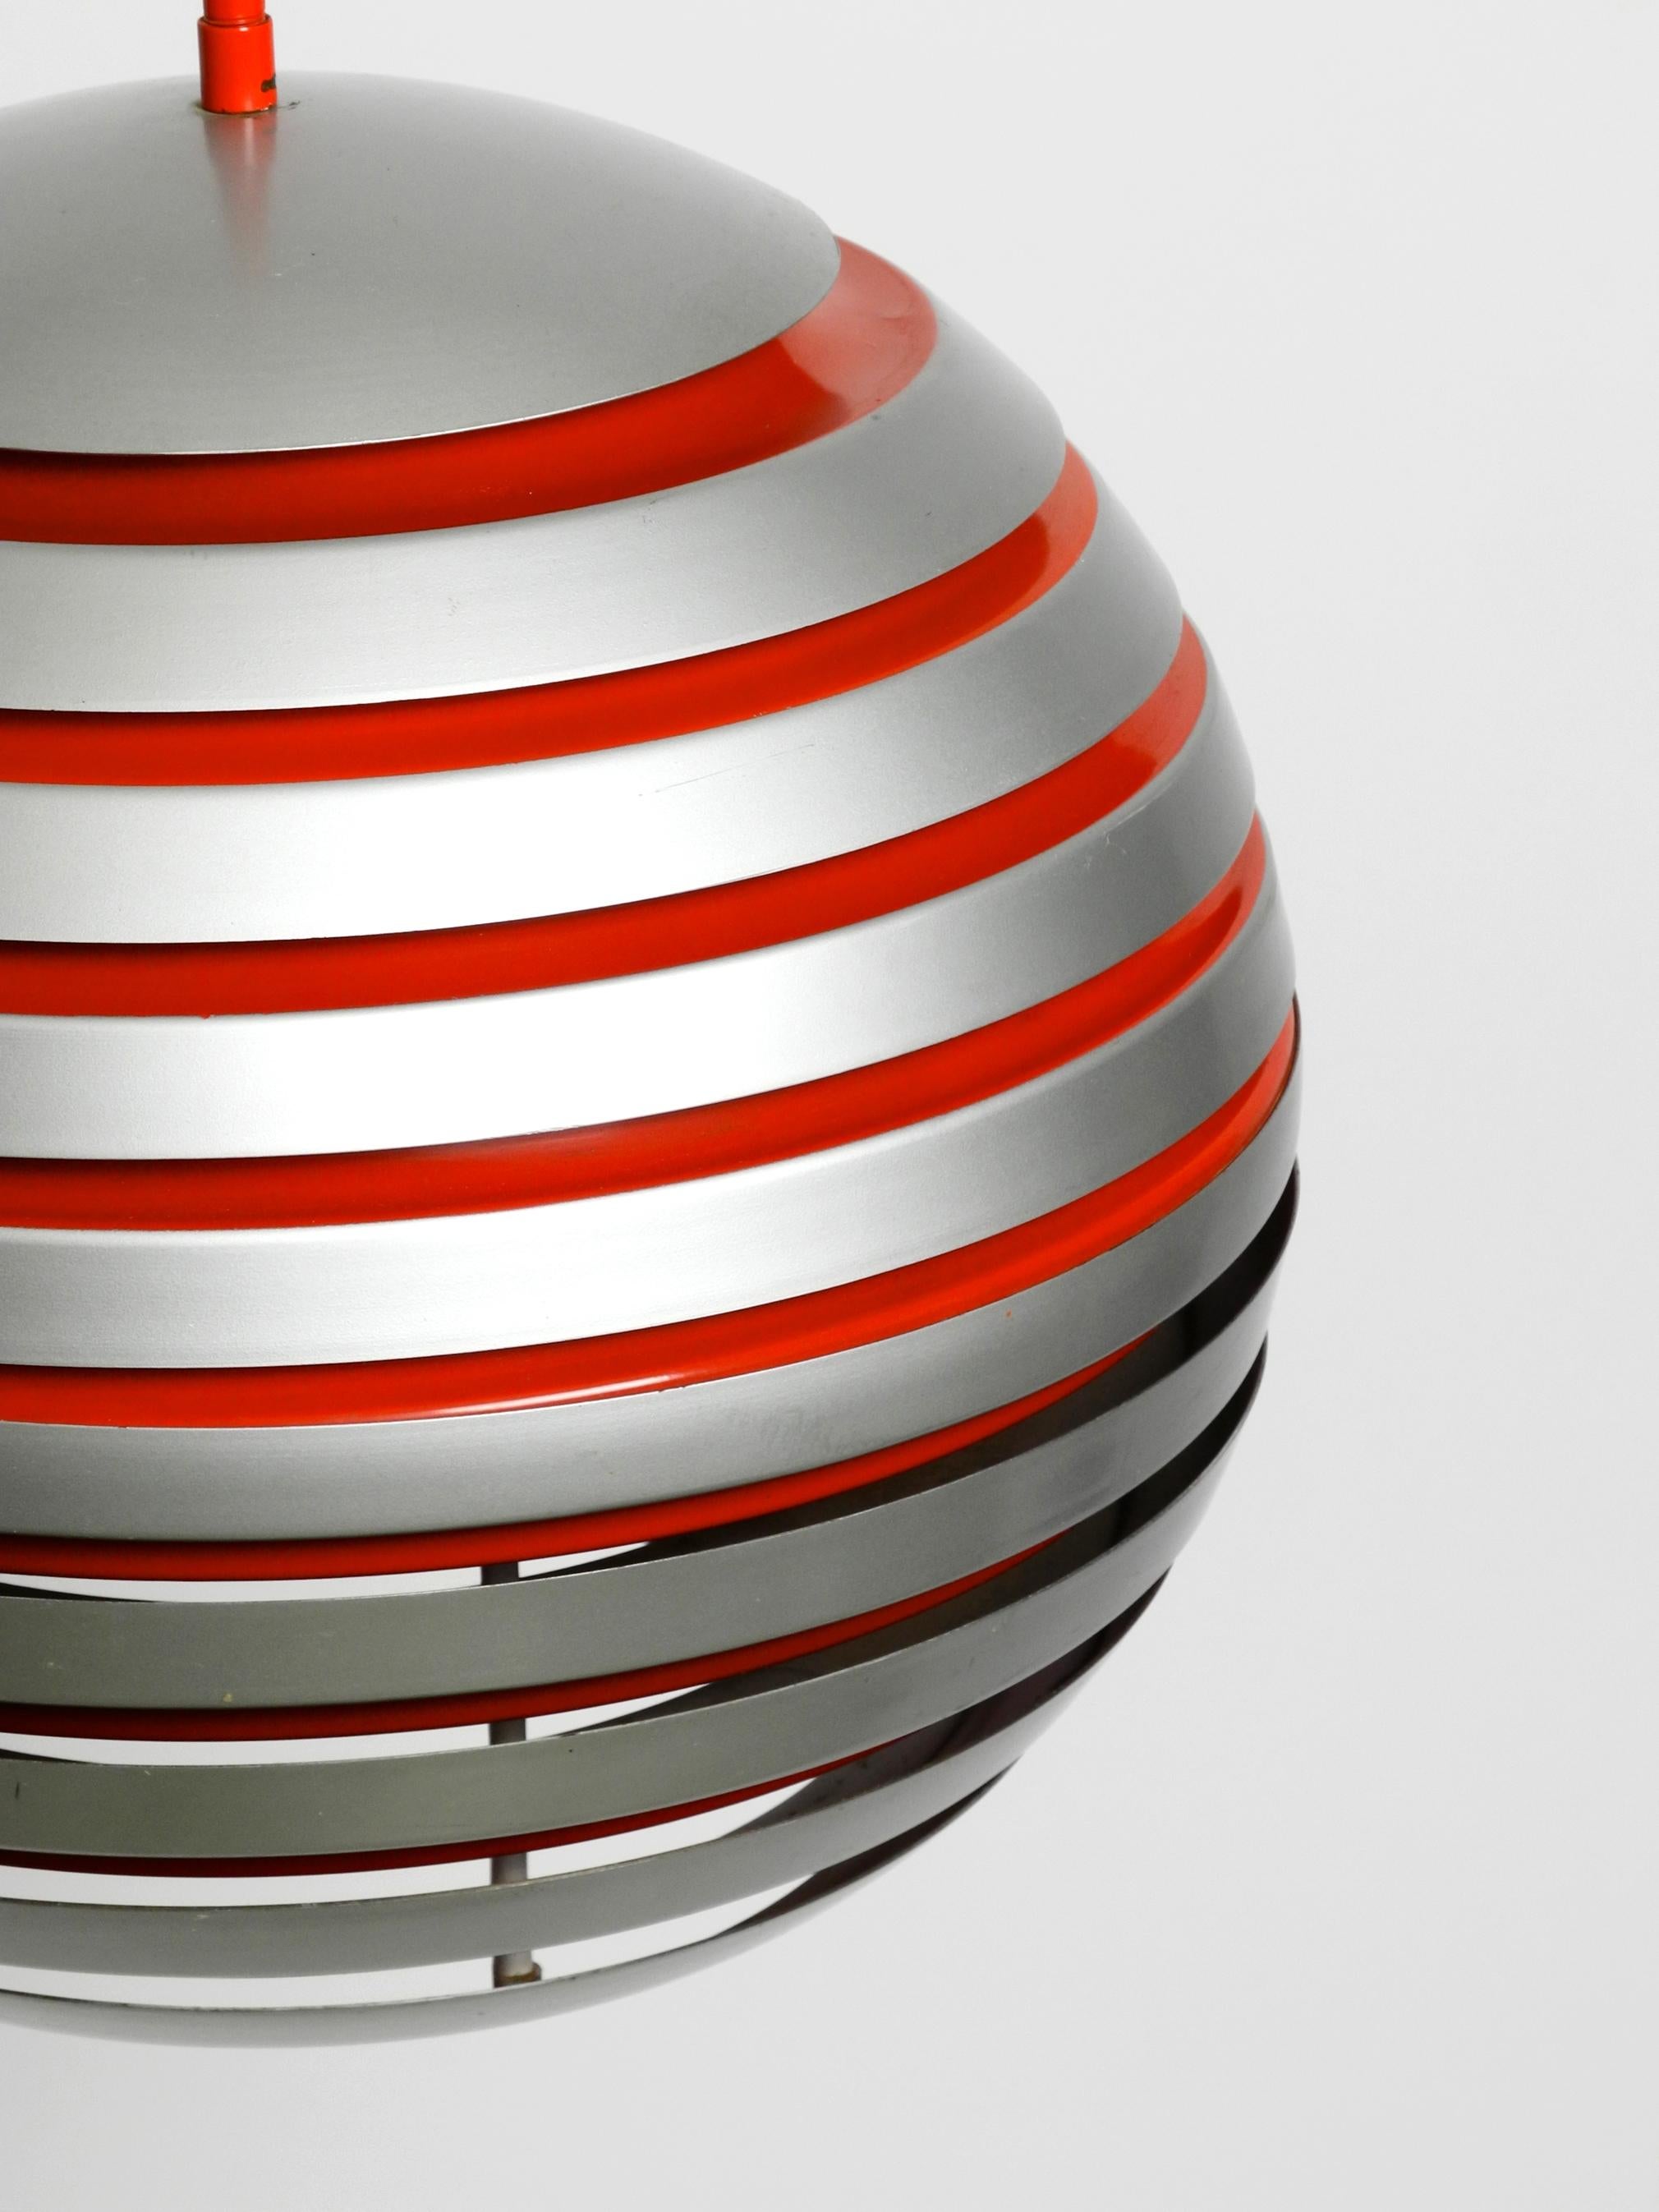 Beautiful 1960s Spherical Space Age Ceiling Lamp with Slats Made of Heavy Metal For Sale 15